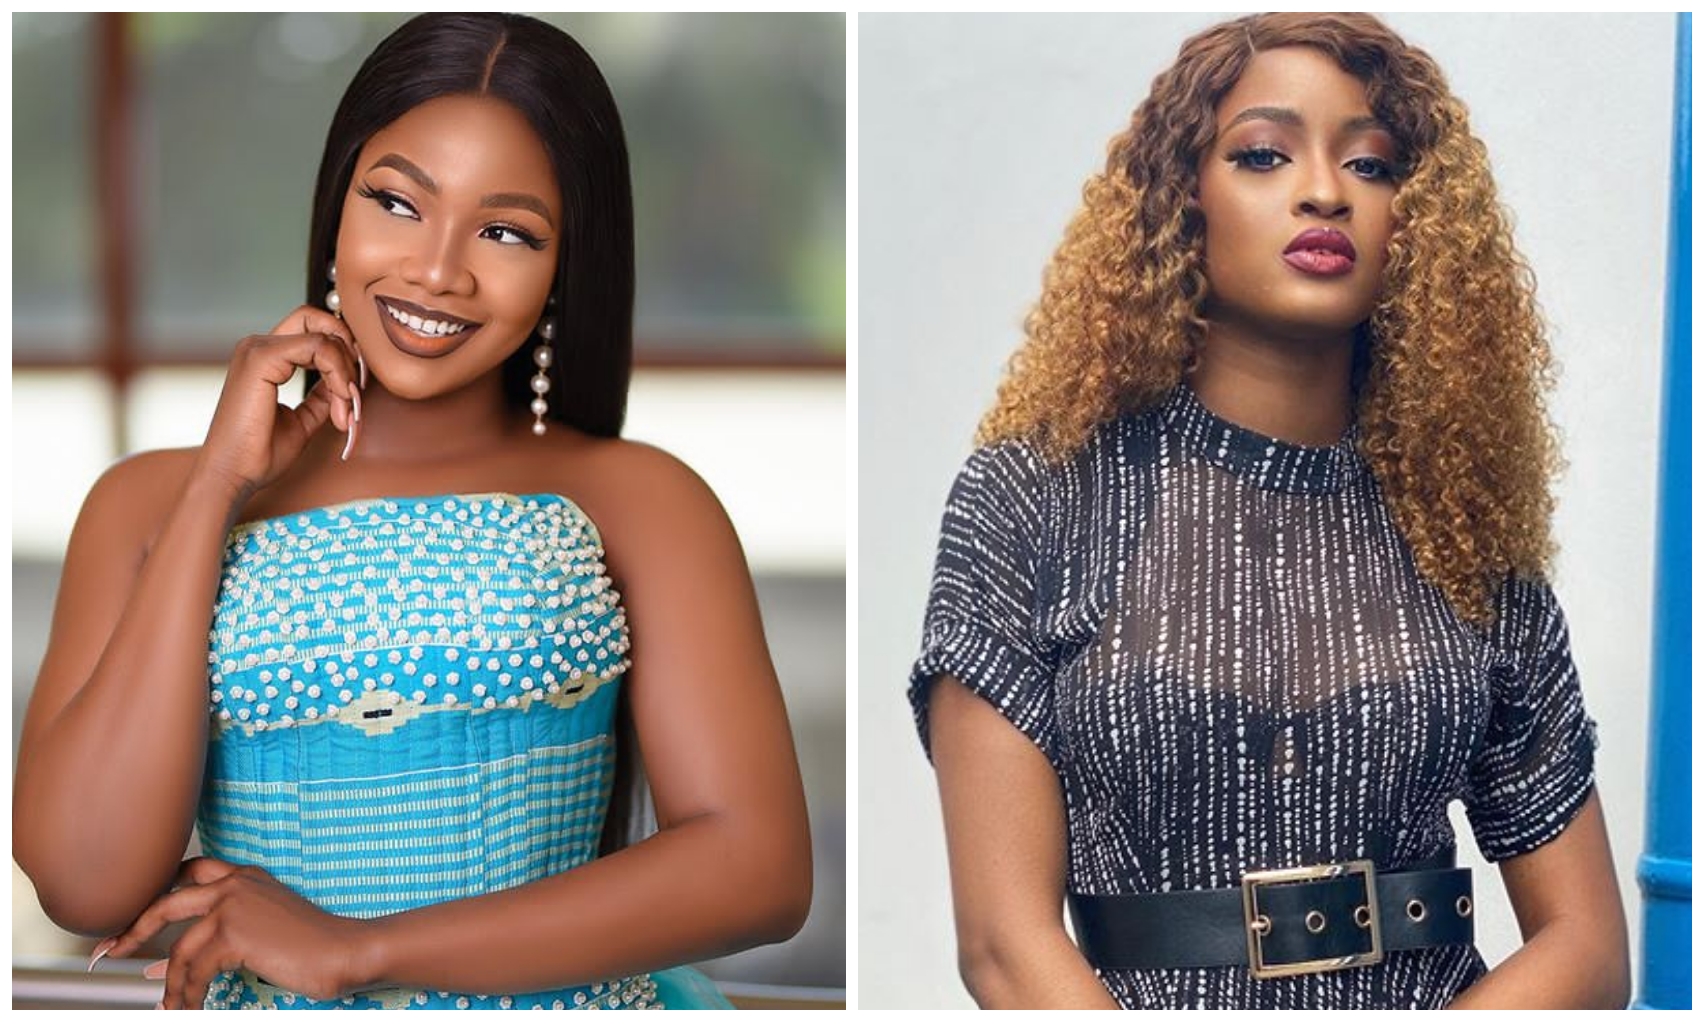 "Better to be disqualified than chasing a disqualified housemate shadow" – Tacha shade Kim Oprah